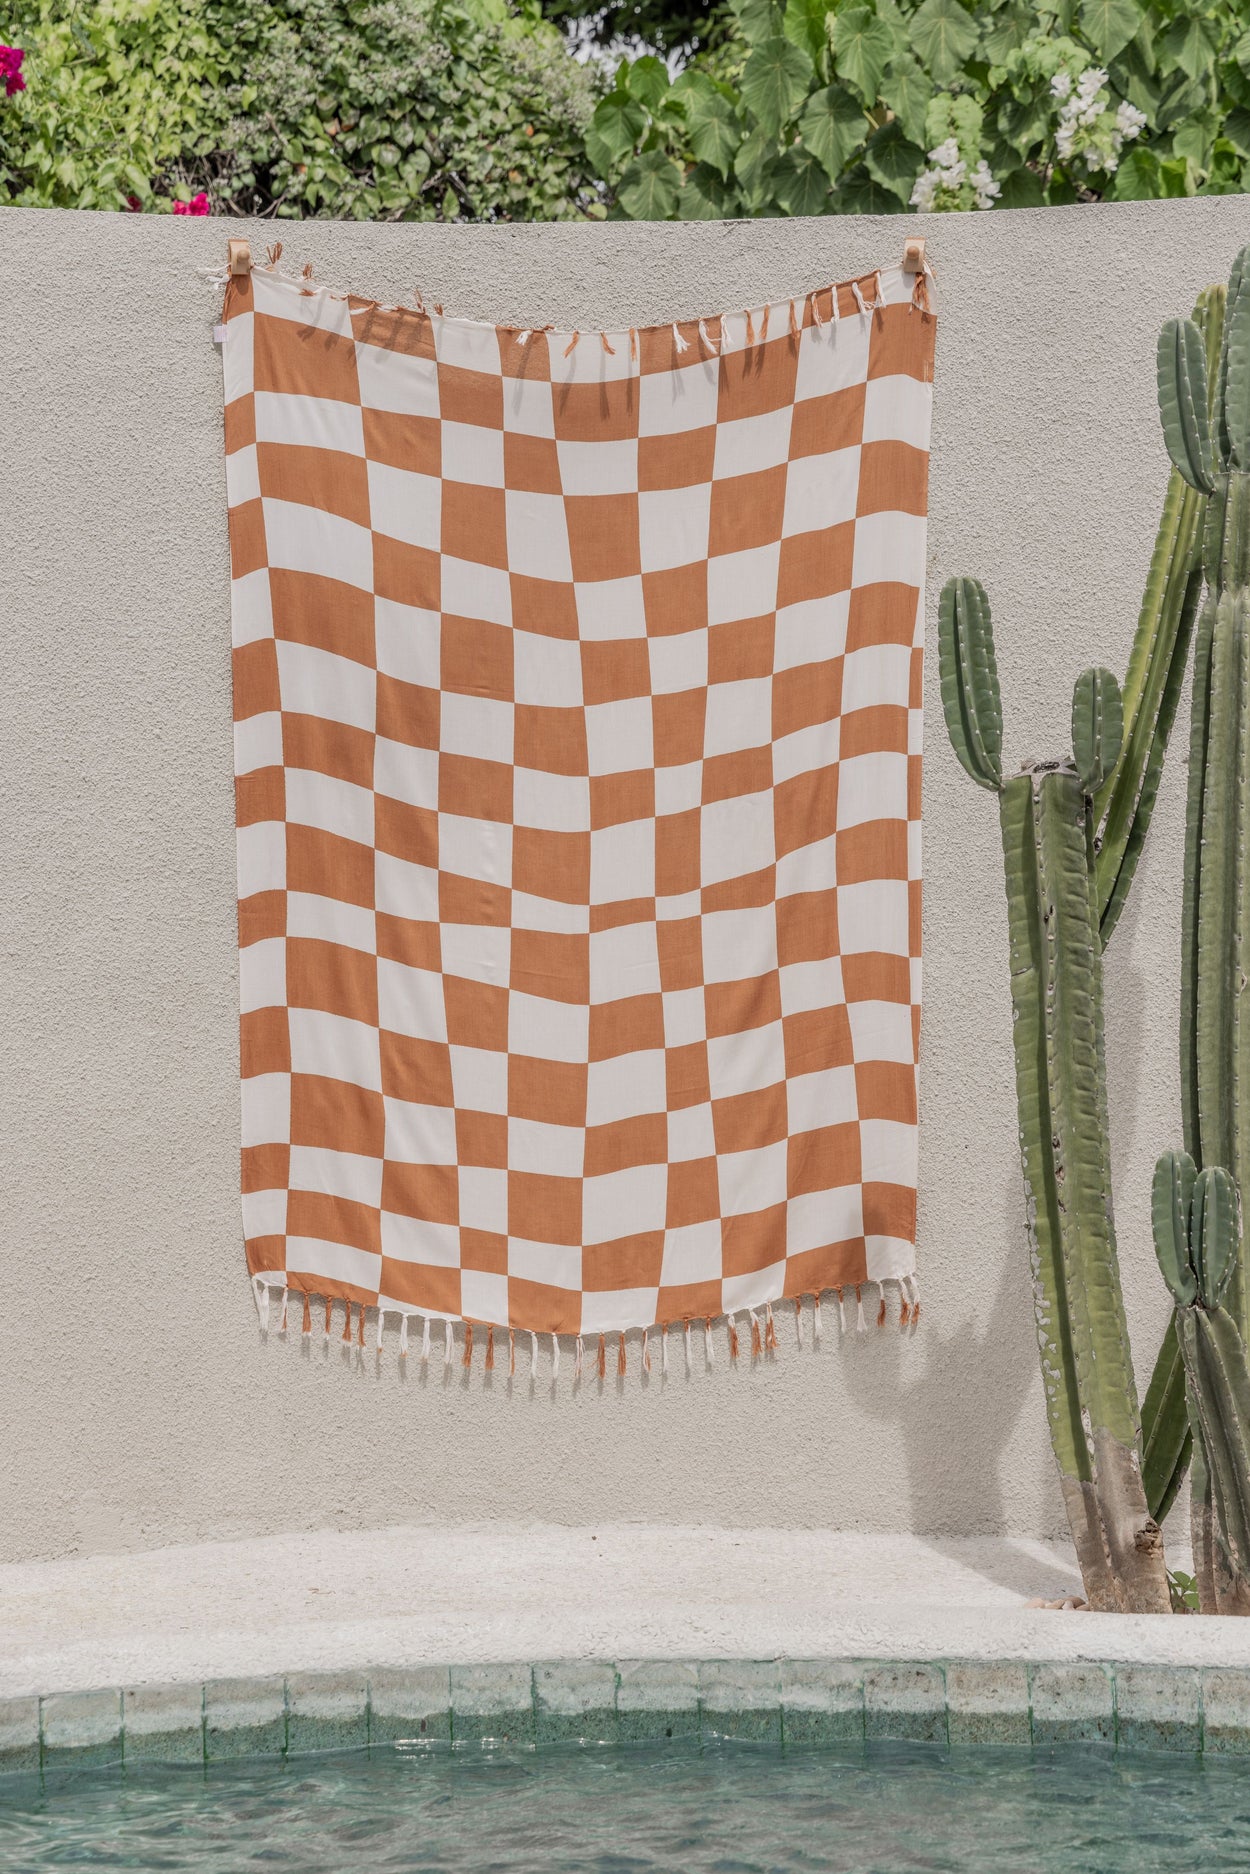 Checkered Tapestry